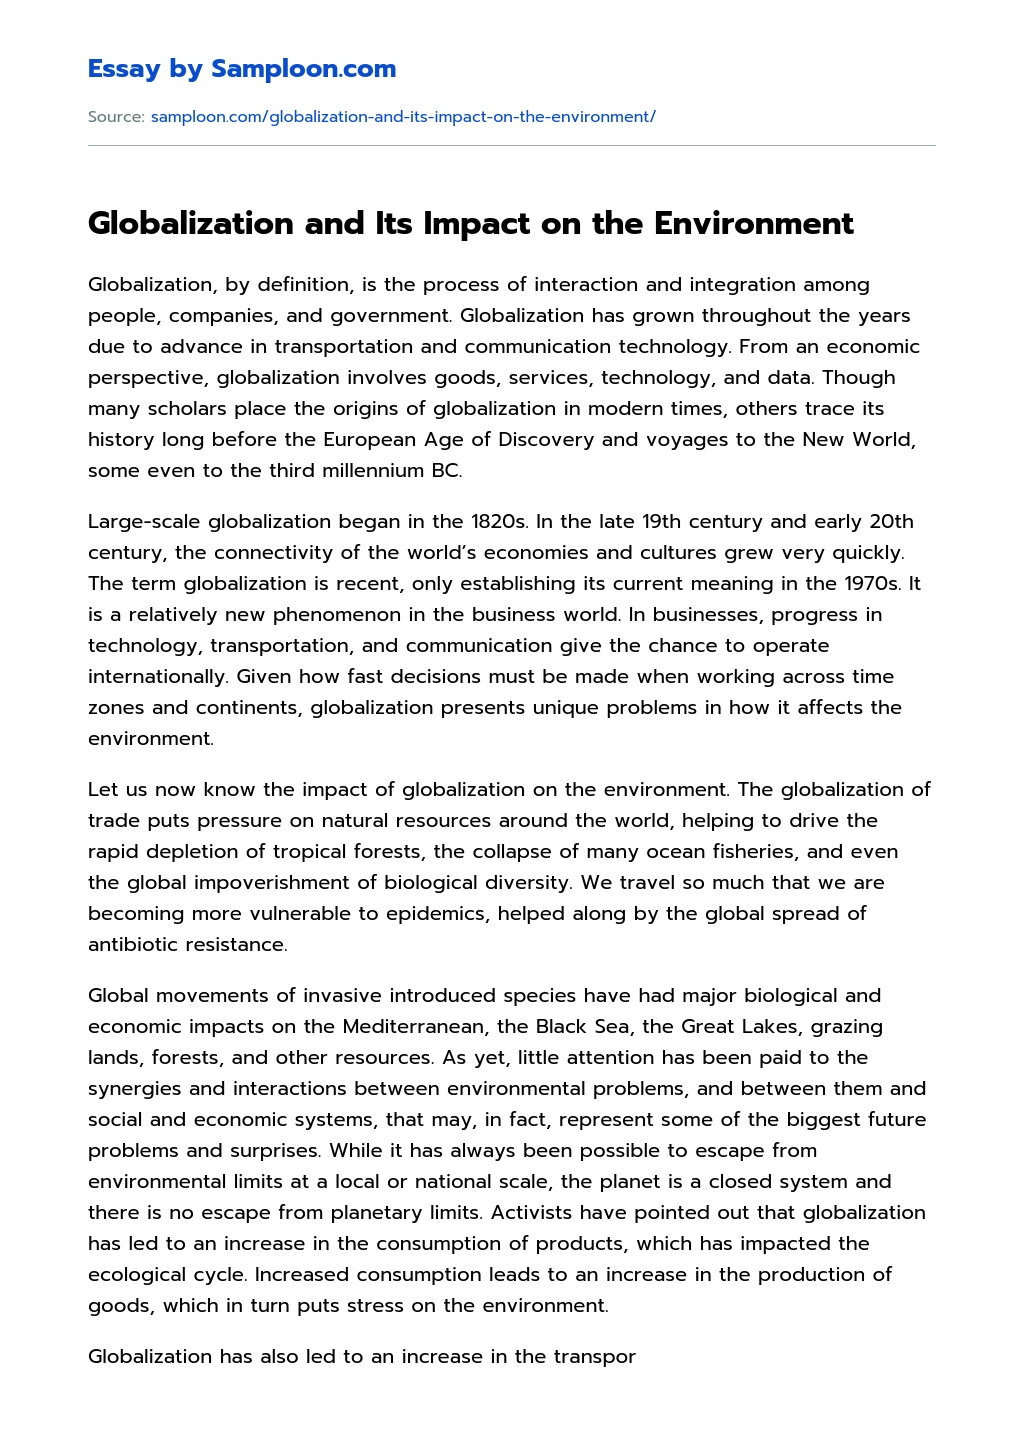 Globalization and Its Impact on the Environment Argumentative Essay essay